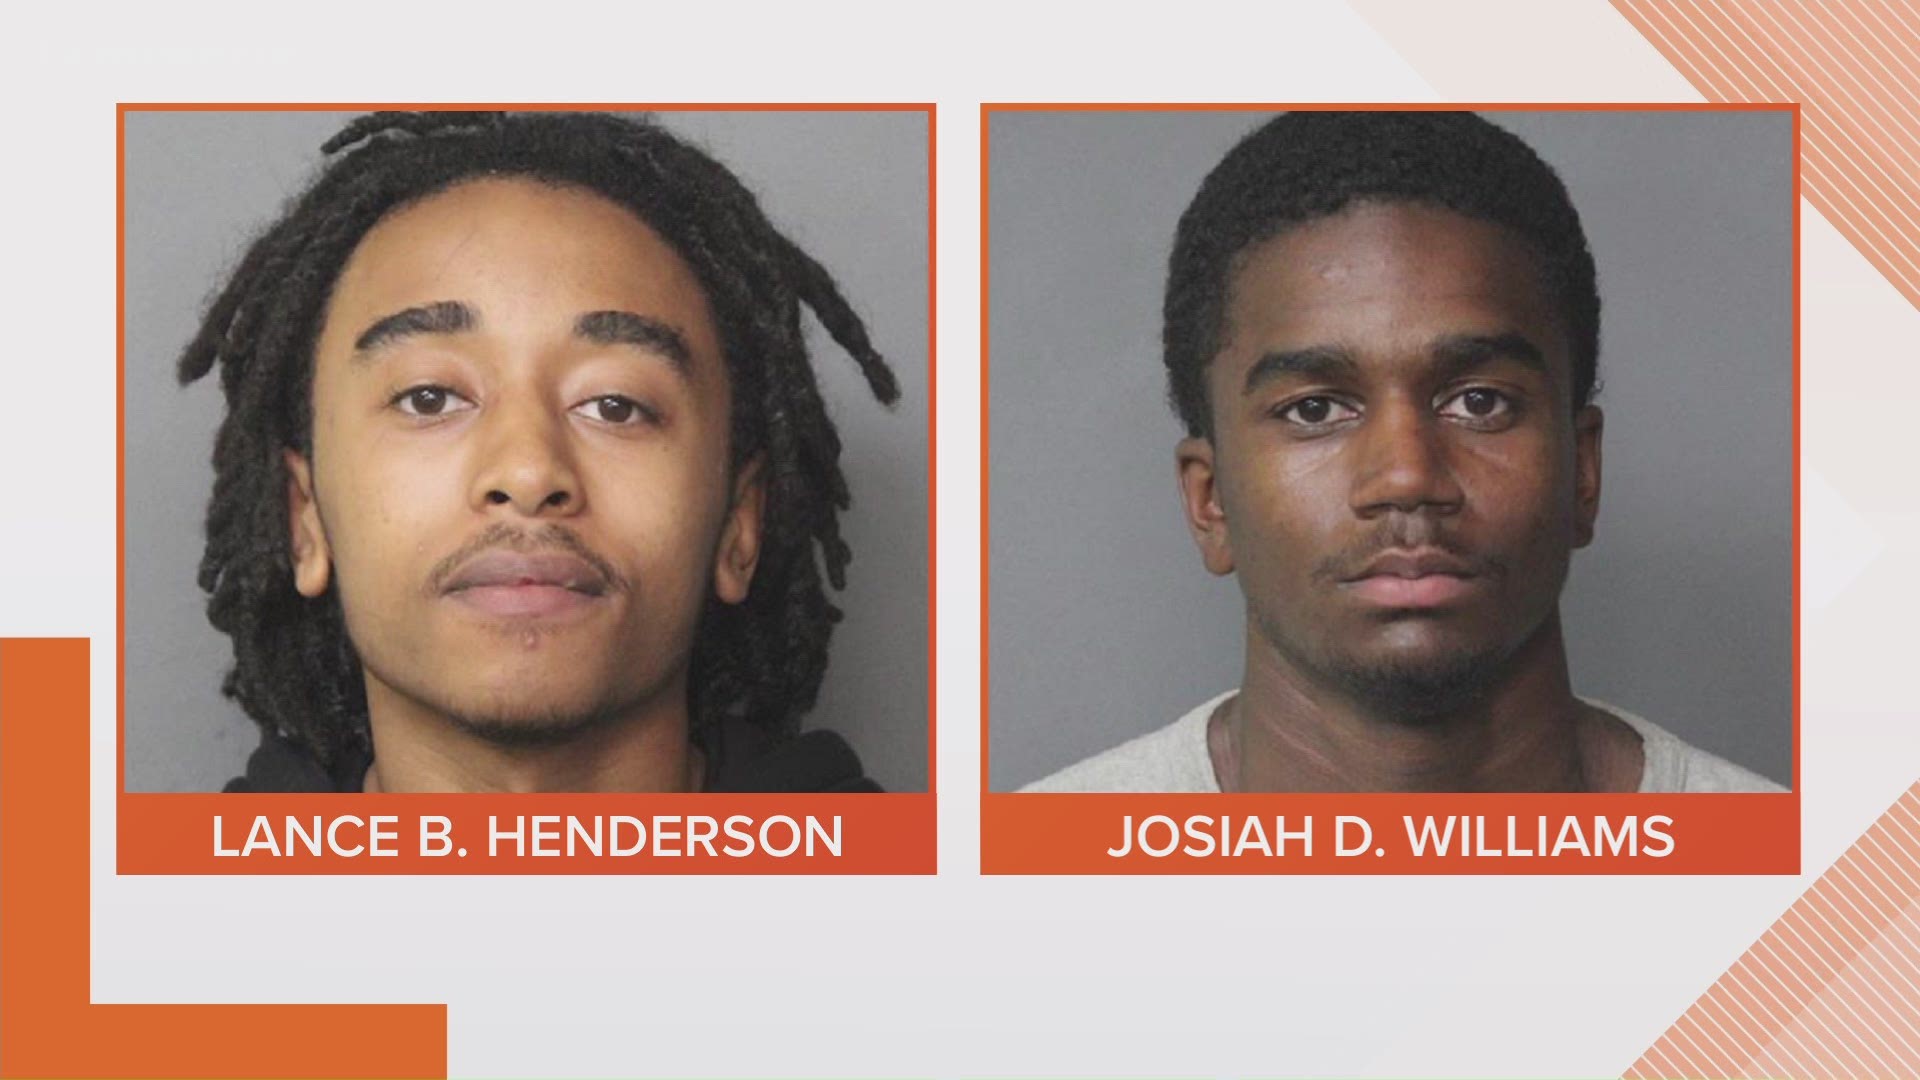 Lance B. Henderson, 18, and Josiah D. Williams, 19, have been charged in connection with the shooting. A 15-year-old girl also ha been charged.